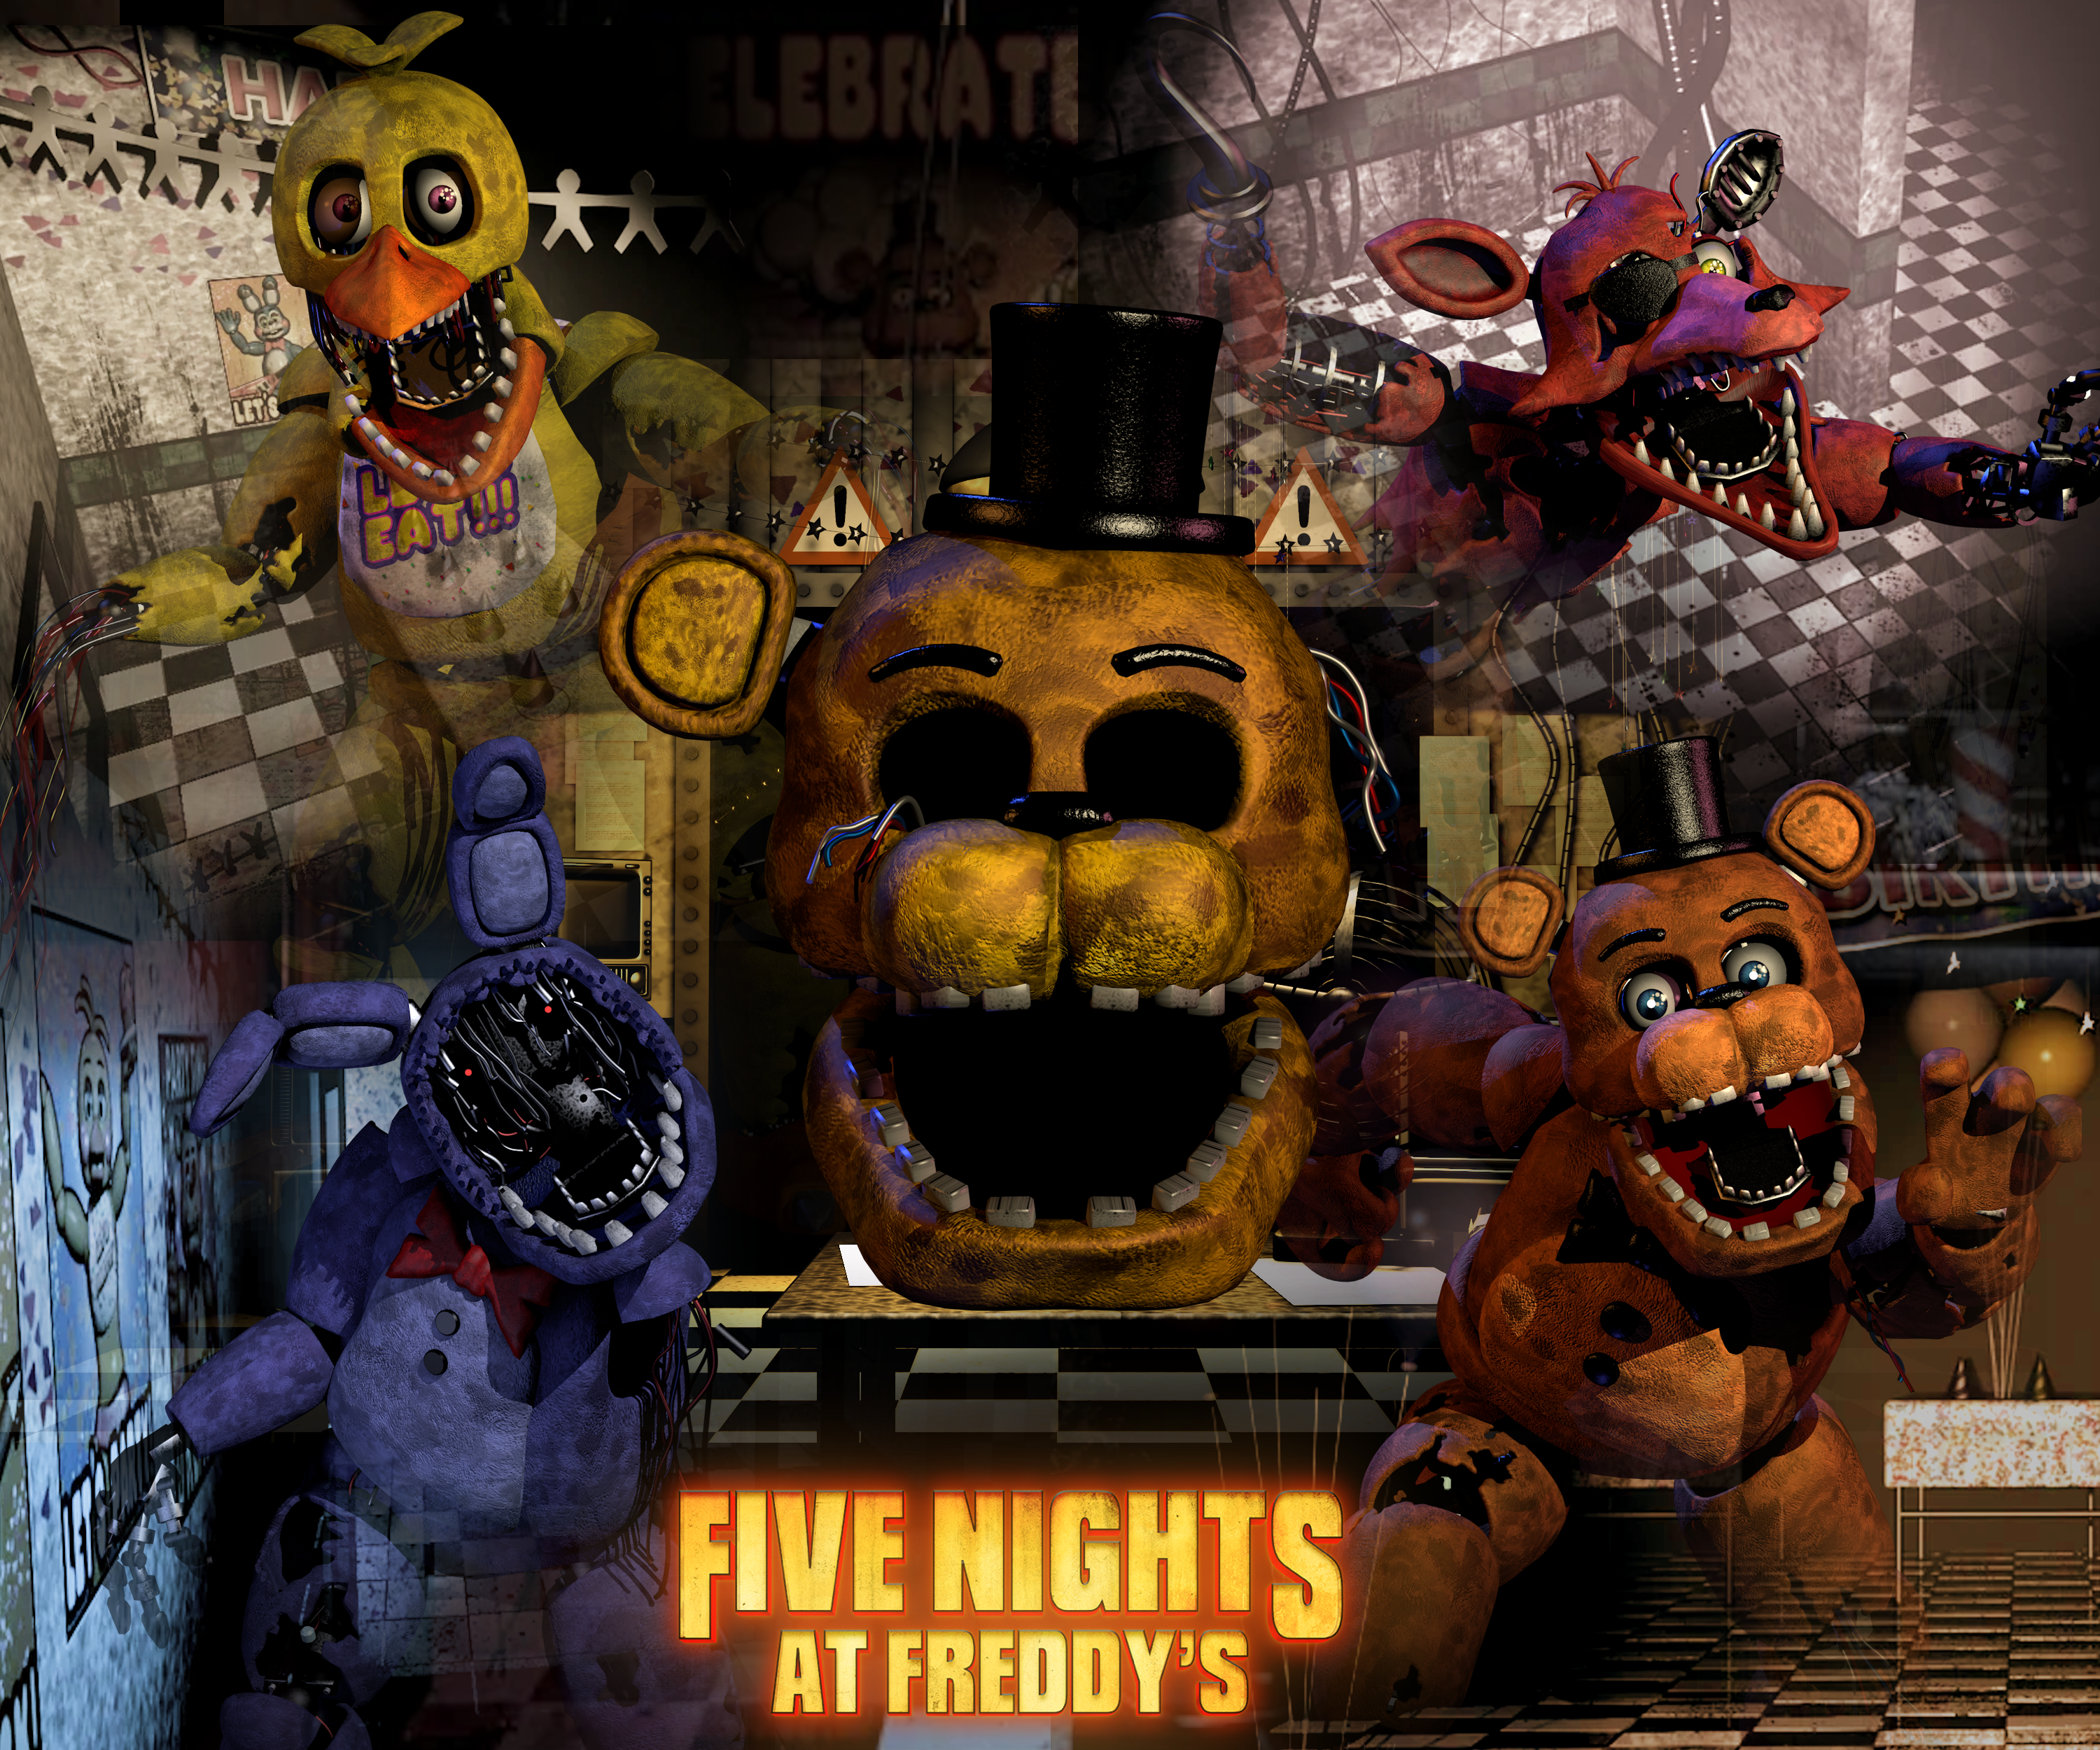 Five Nights at Freddy's 2 - Withereds  Made in Cinema 4D R19 :  r/fivenightsatfreddys